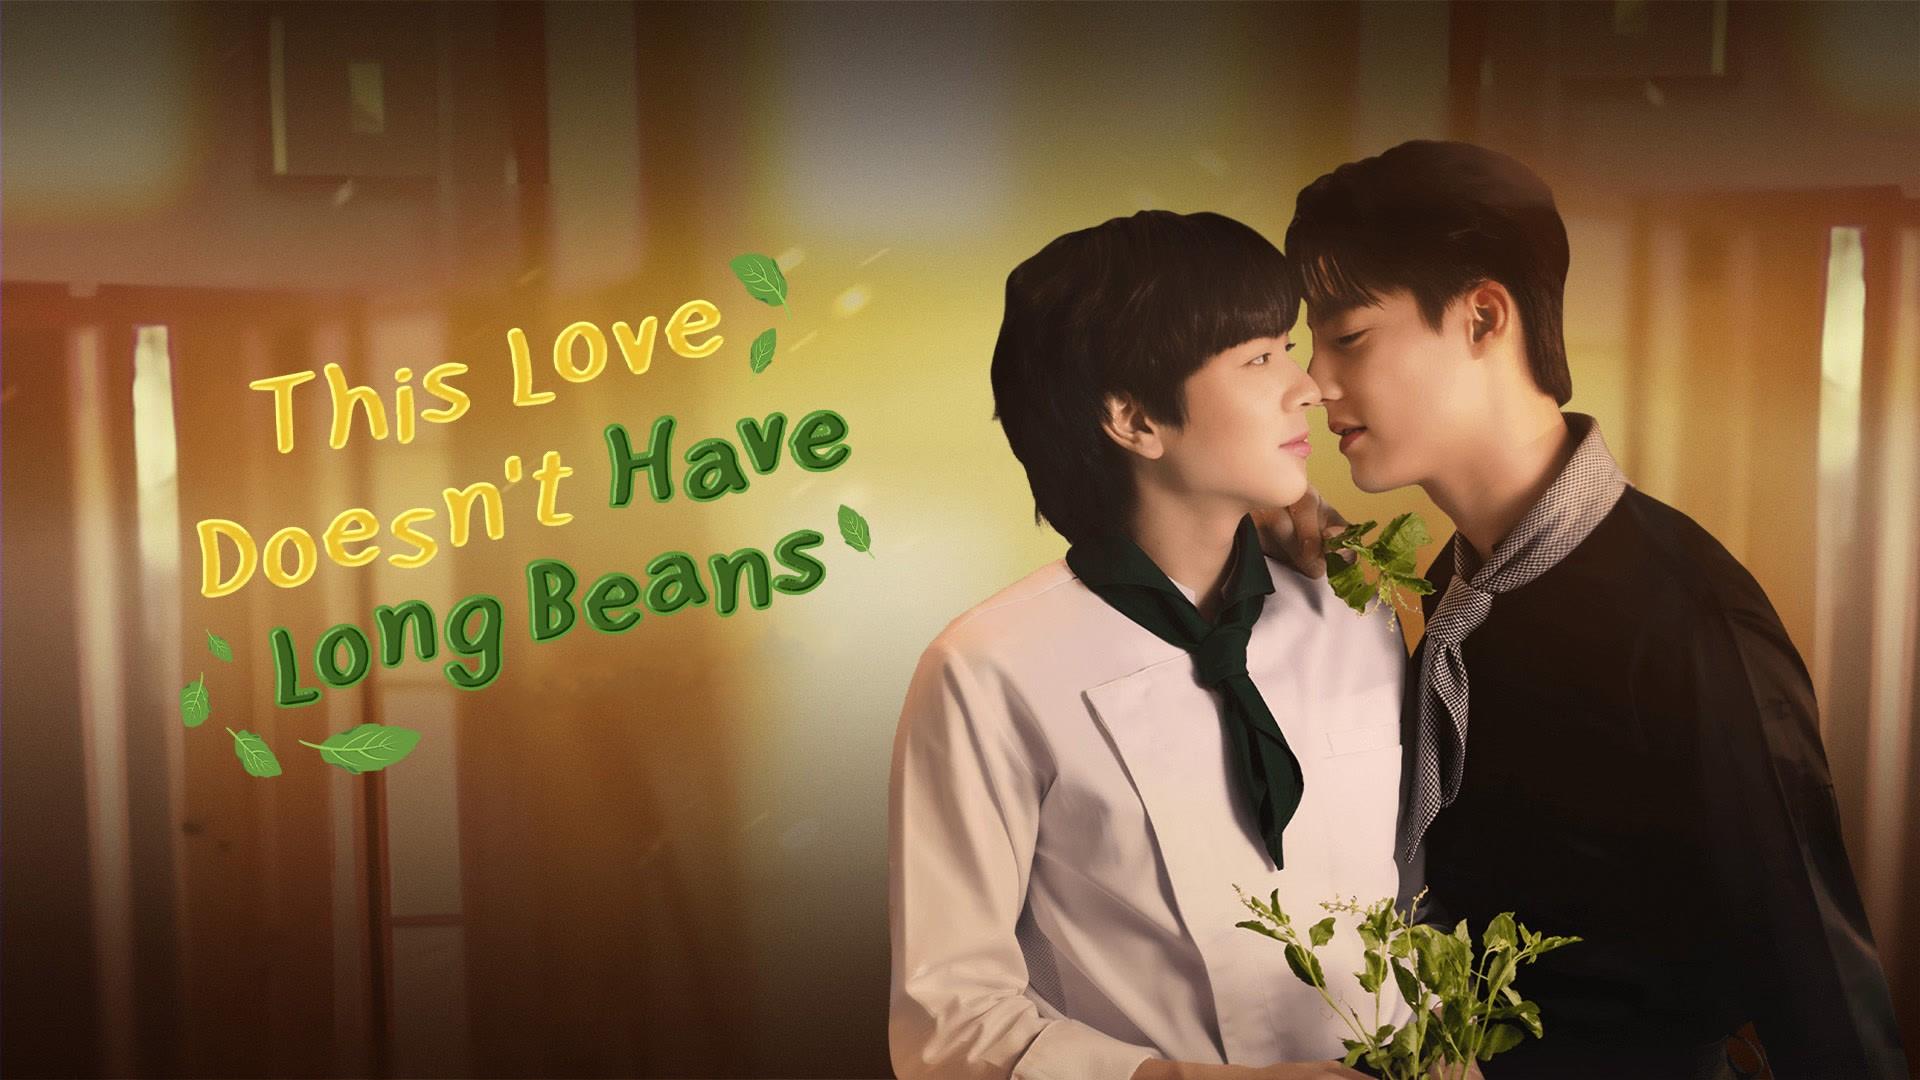 This Love Doesn't Have Long Beans